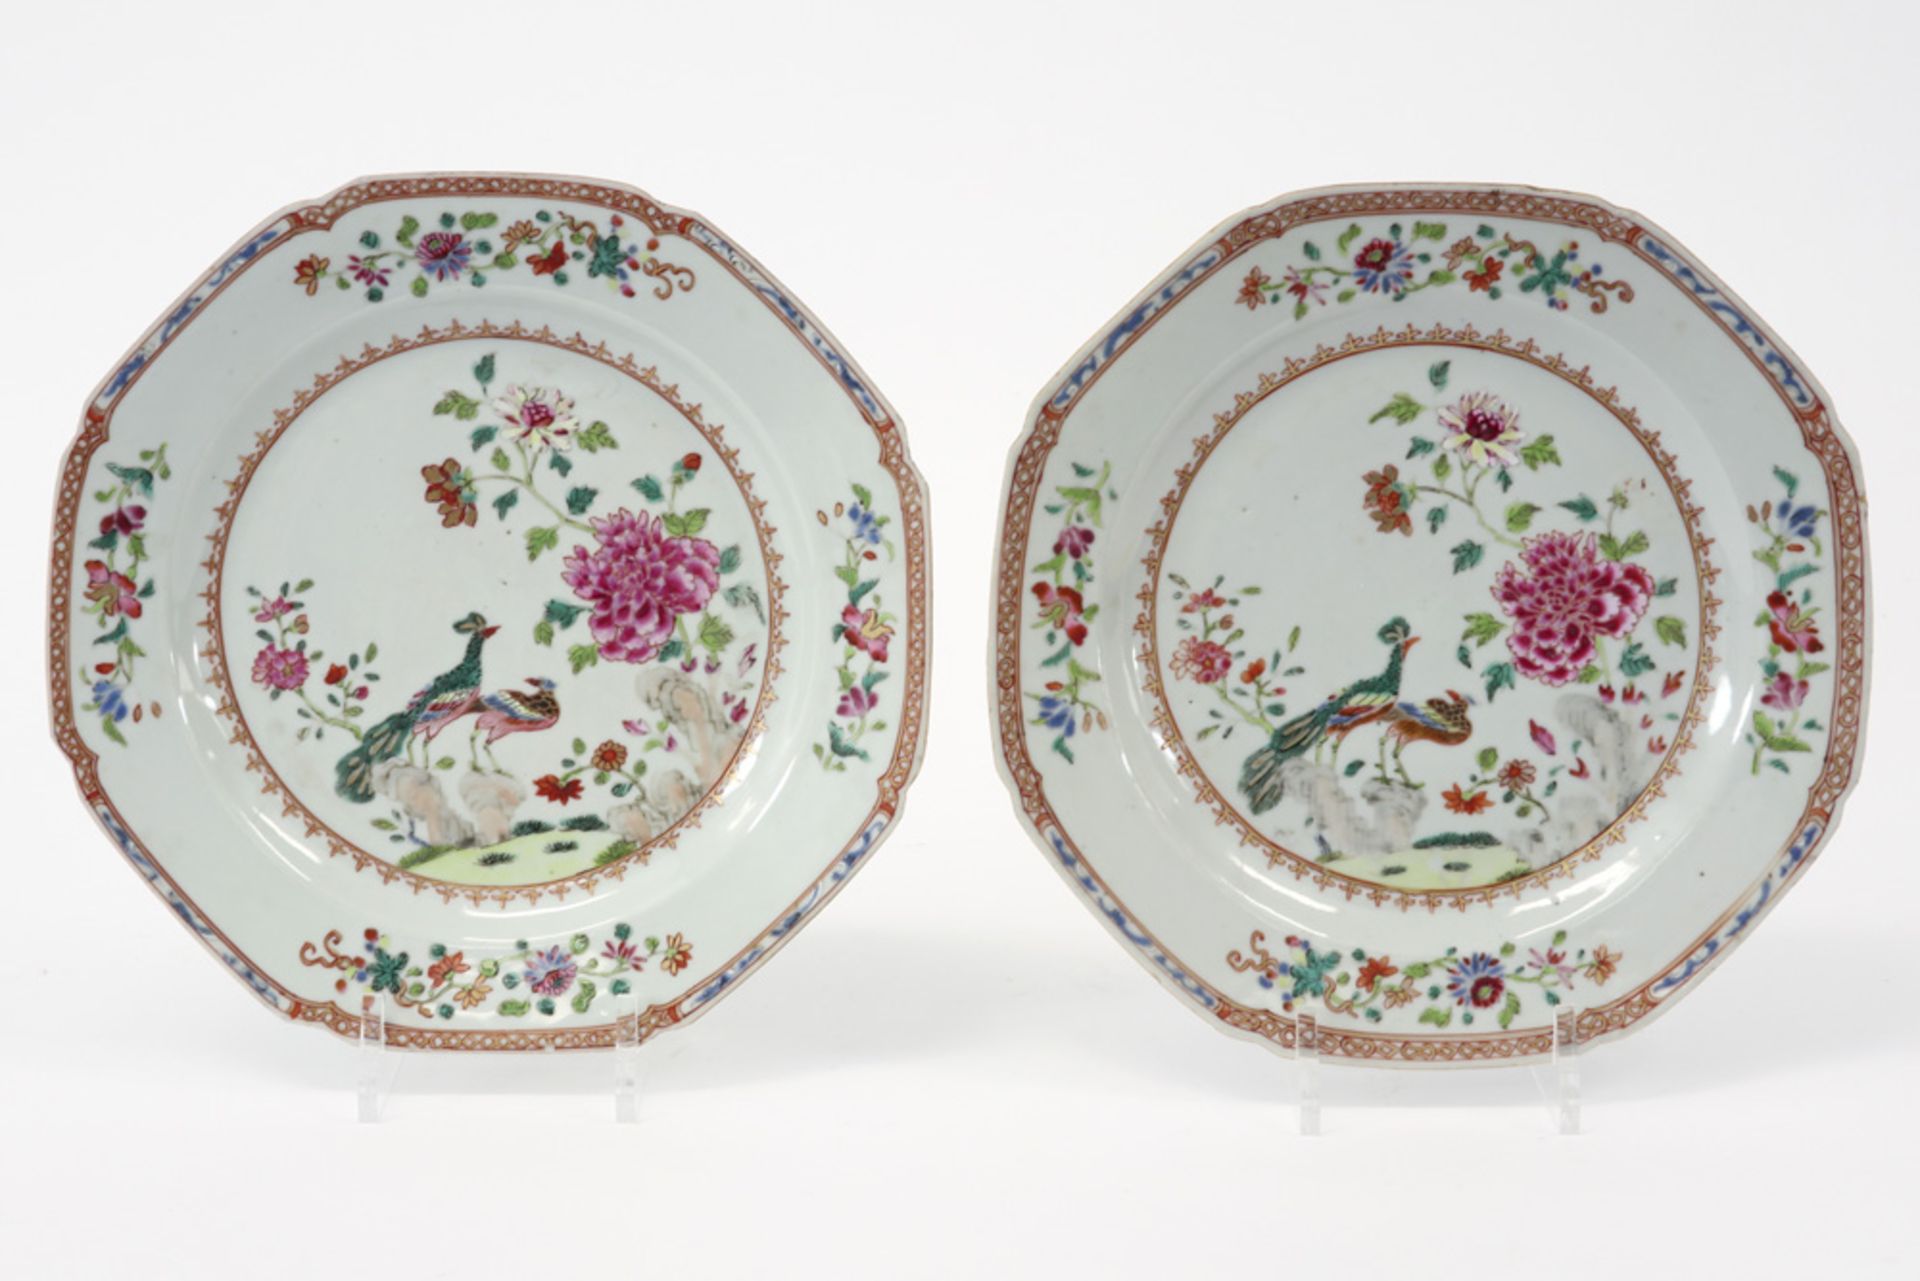 pair of 18th Cent. Chinese octogonal plates in porcelain with a 'Famille Rose' decor with